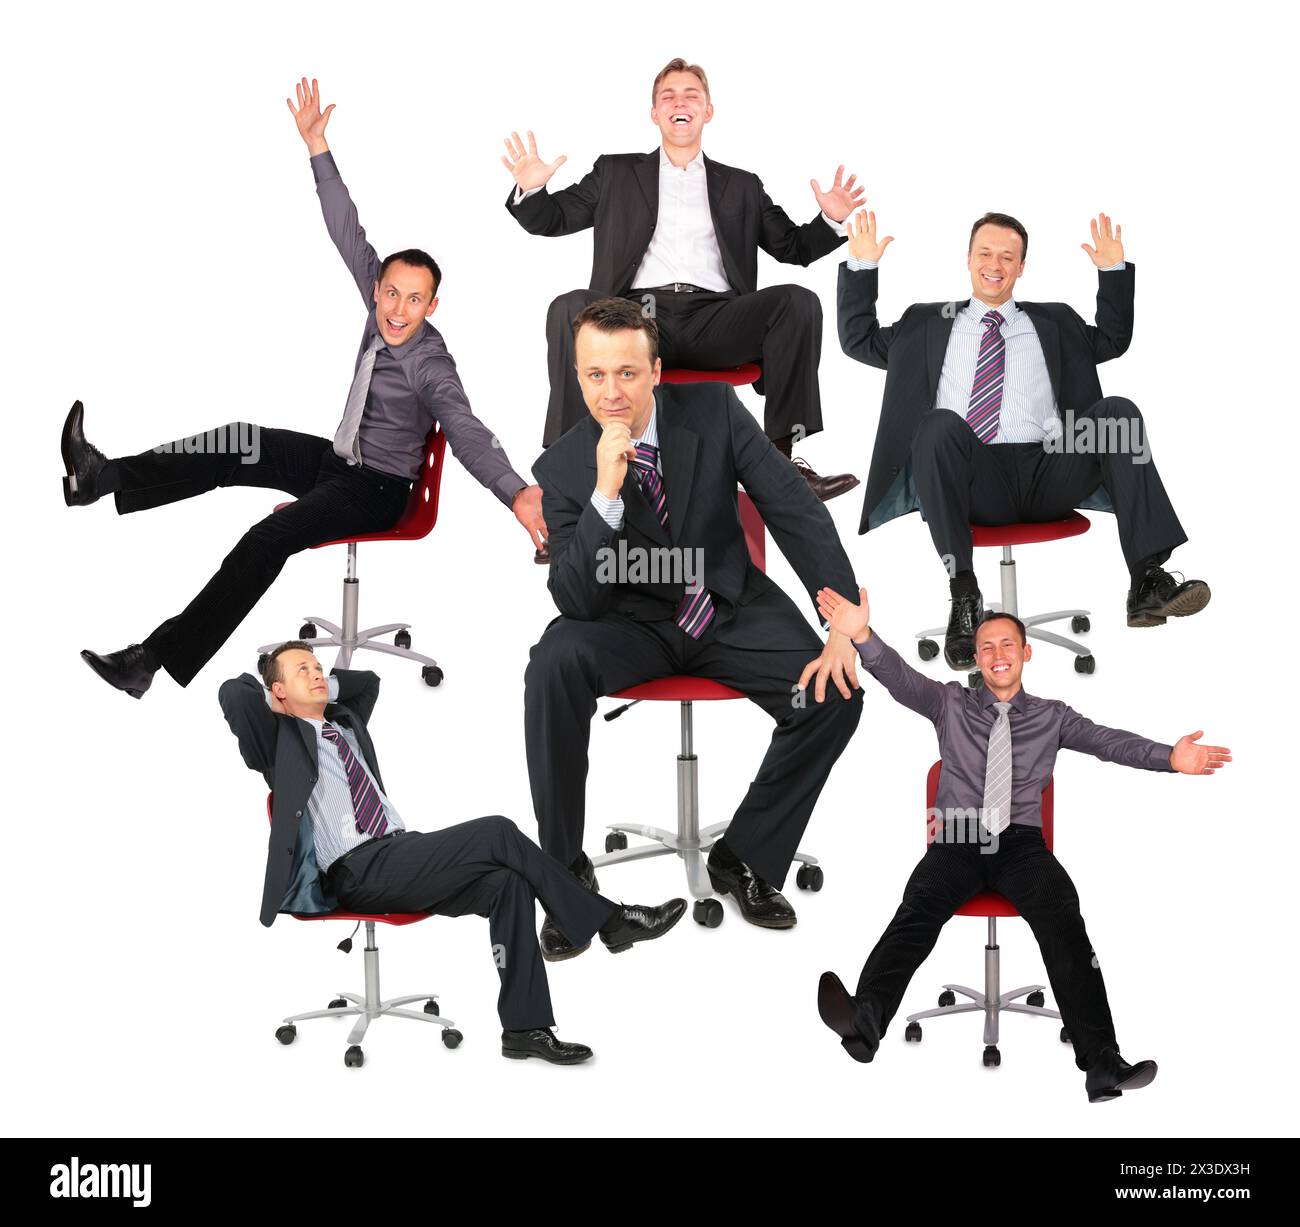 Businessmen on red office chairs, collage. Stock Photo